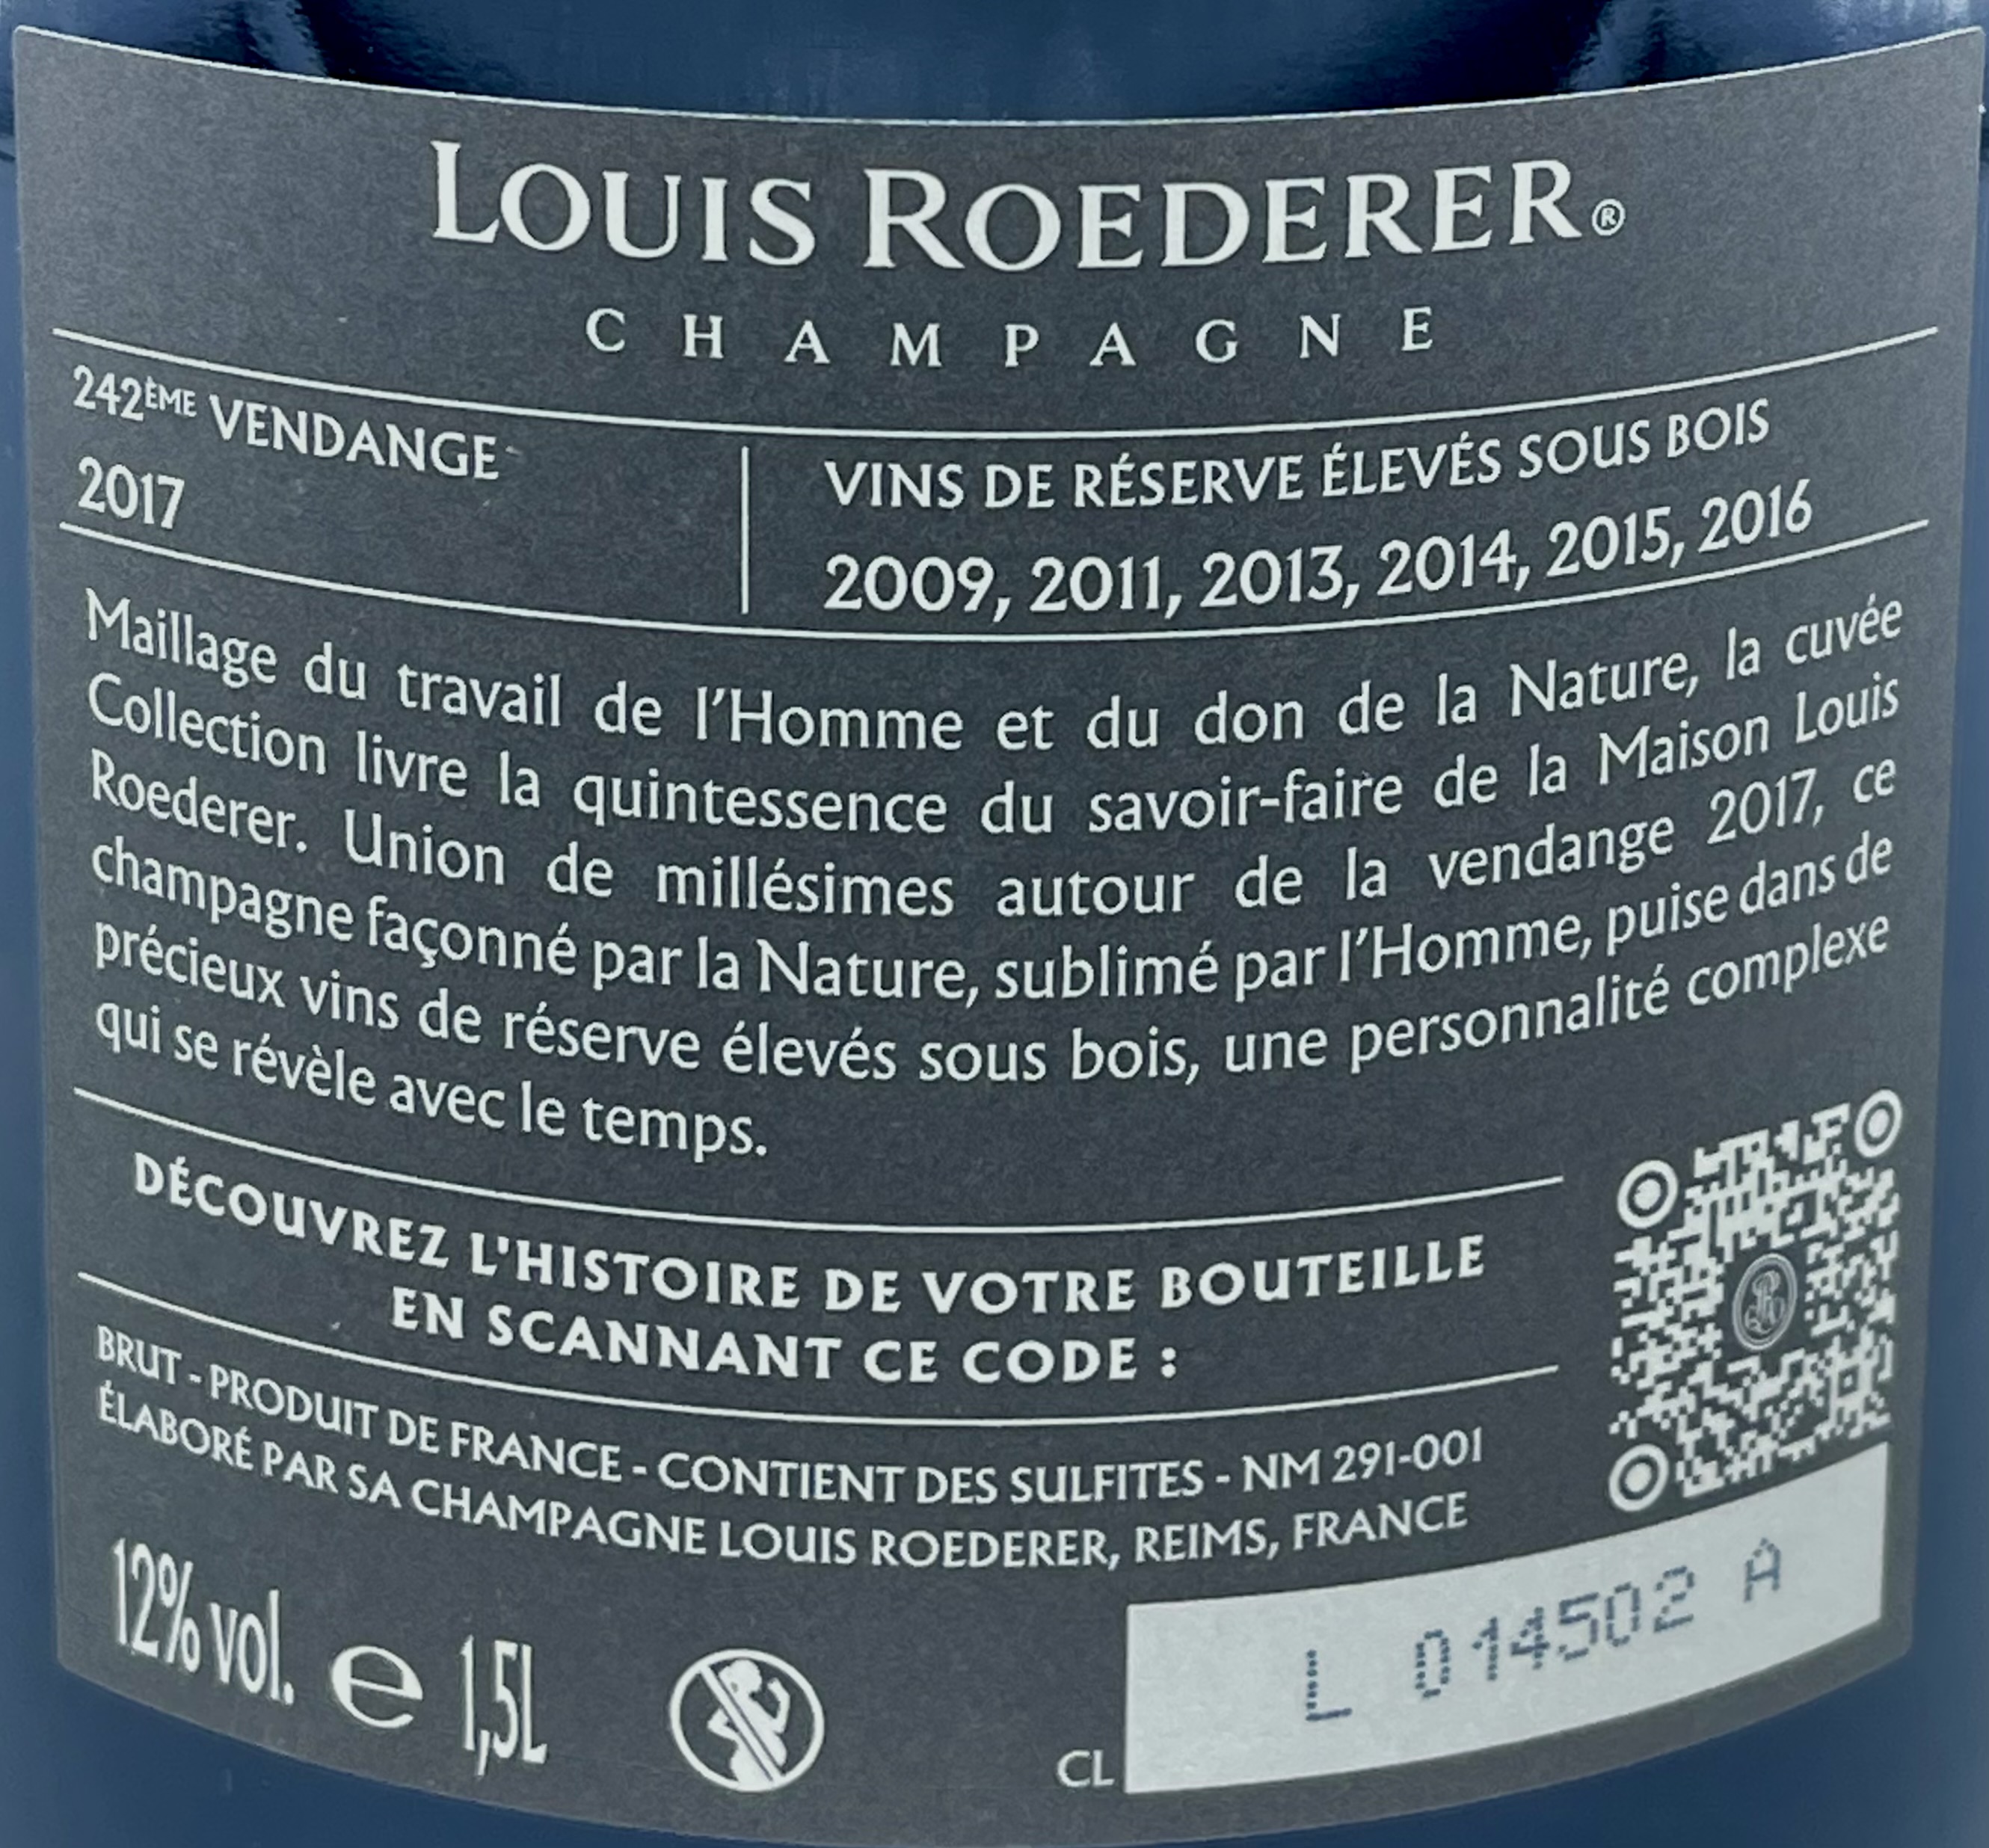 Champagne - Louis Roederer 